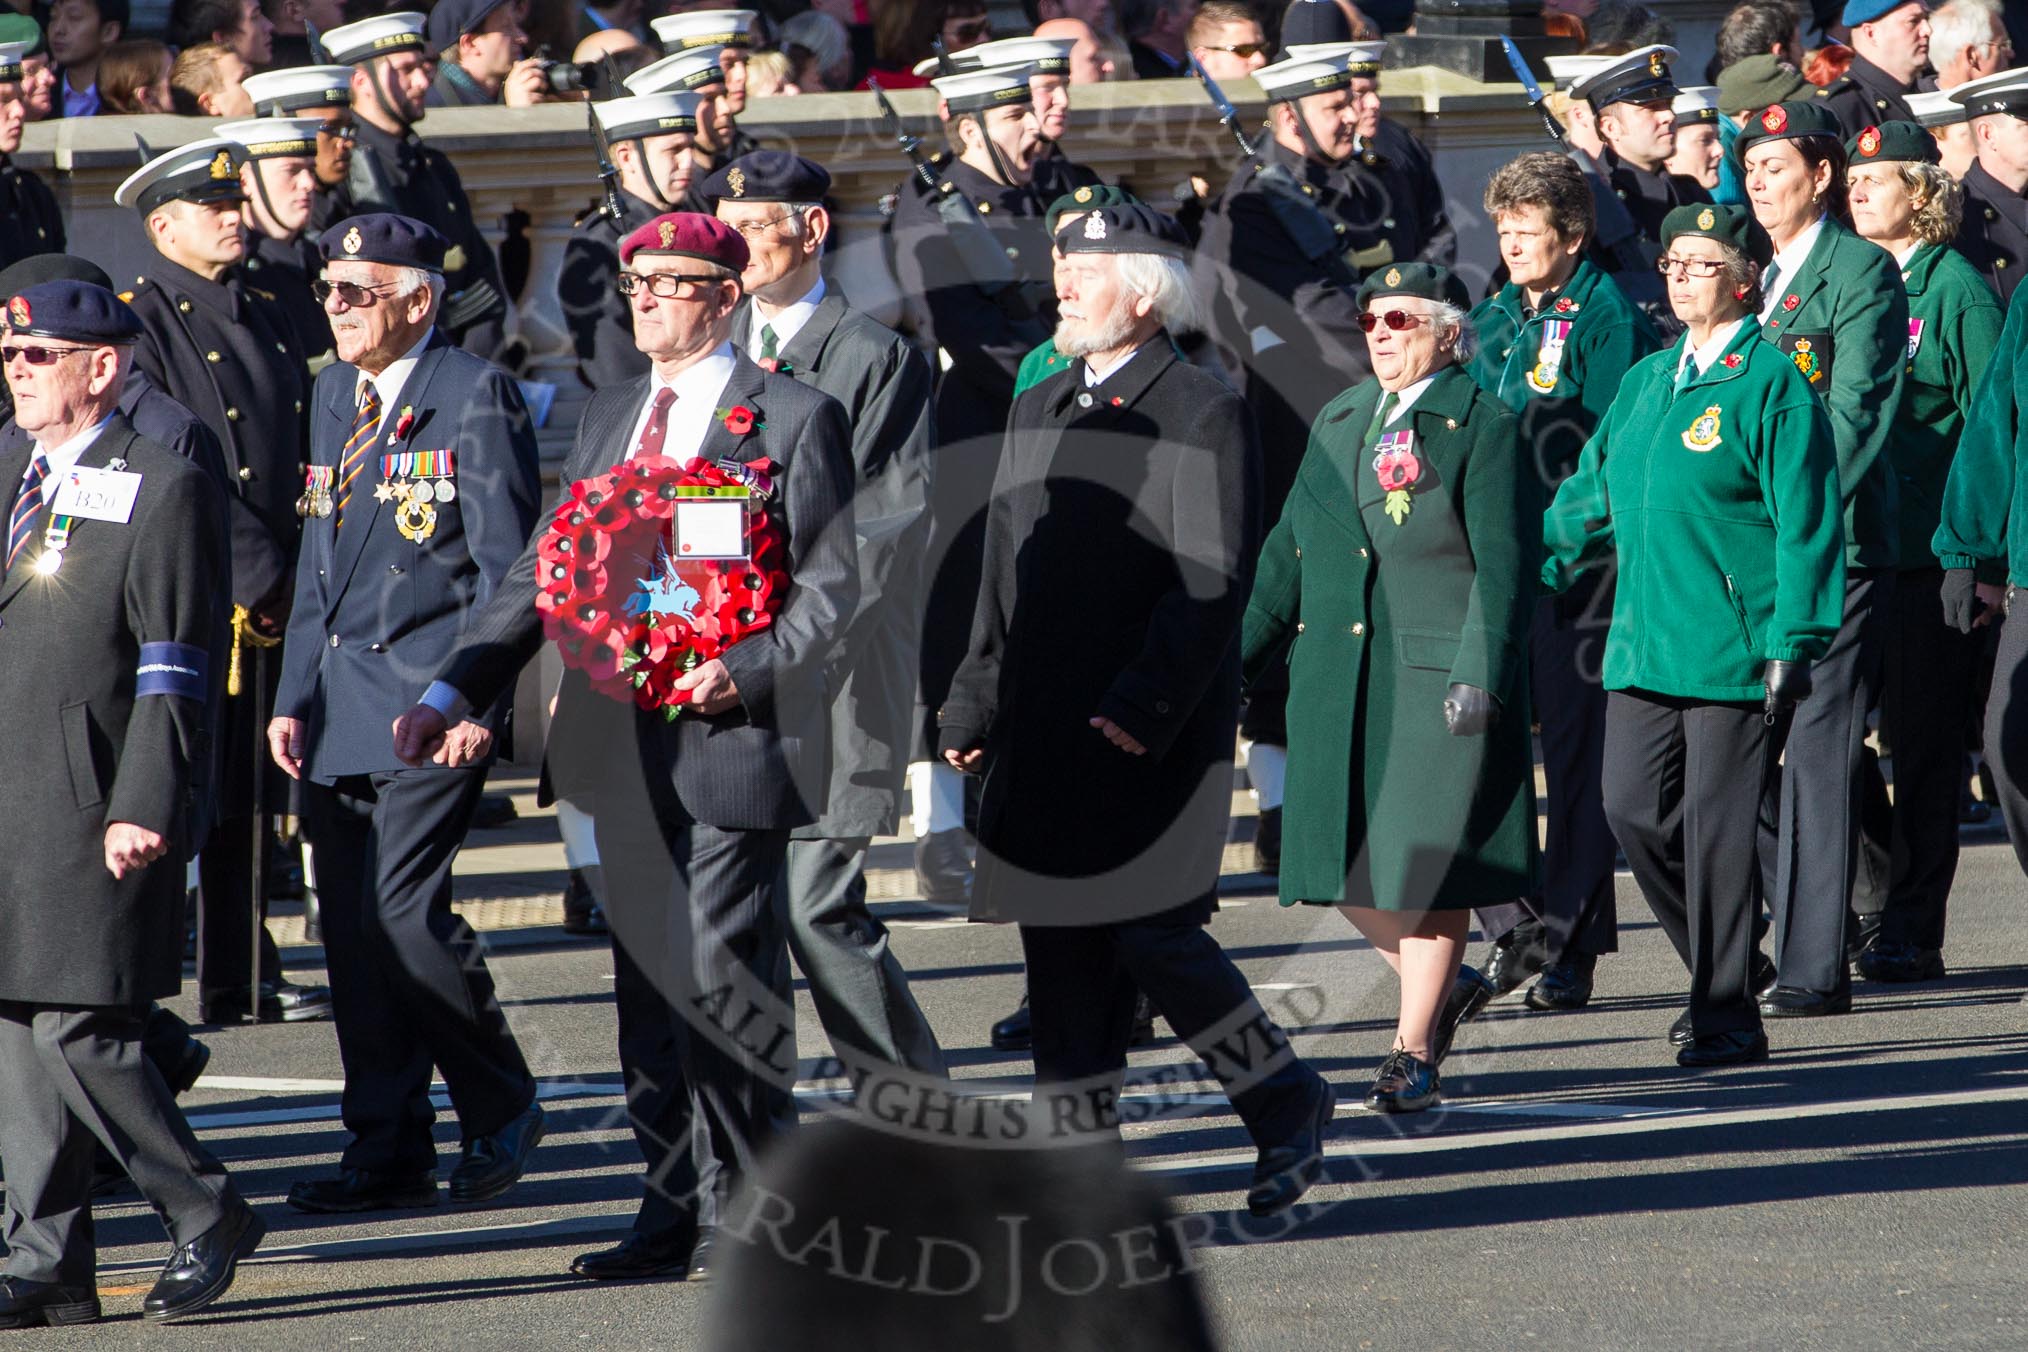 Remembrance Sunday 2012 Cenotaph March Past: Group B20 - Arborfield Old Boys Association, and B21 - Women's Royal Army Corps Association..
Whitehall, Cenotaph,
London SW1,

United Kingdom,
on 11 November 2012 at 11:57, image #945